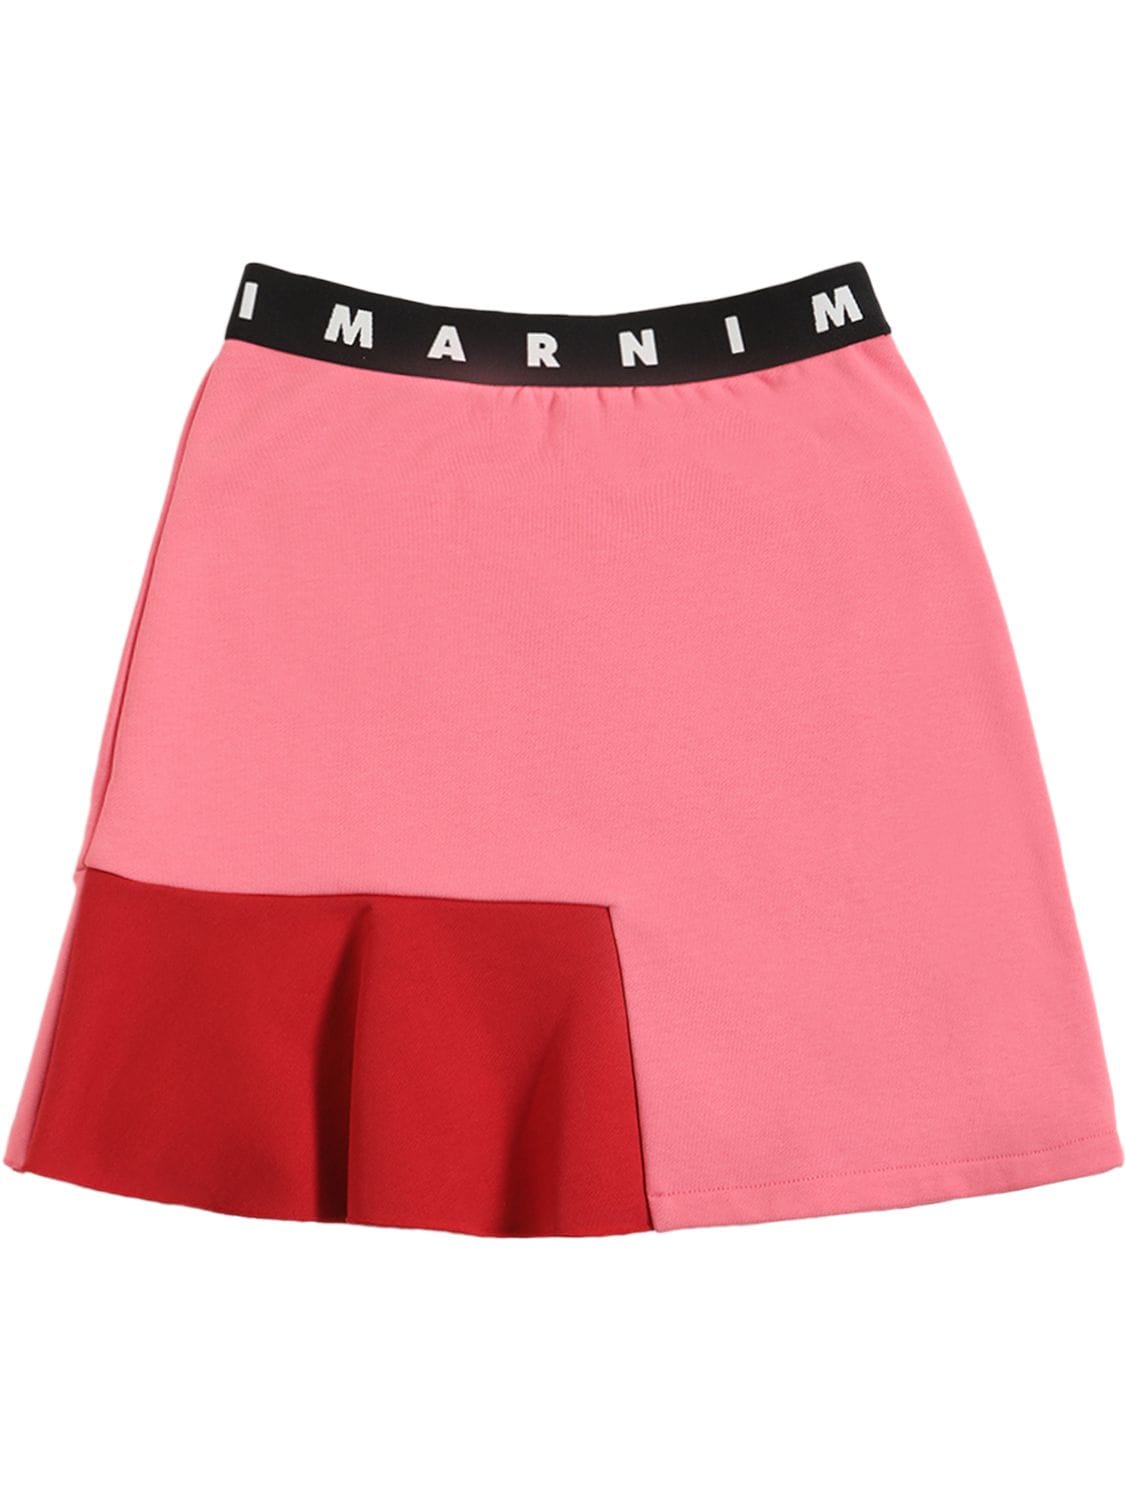 Marni Junior Kids' Colour Block Cotton Skirt W/logo Tape In Pink,red